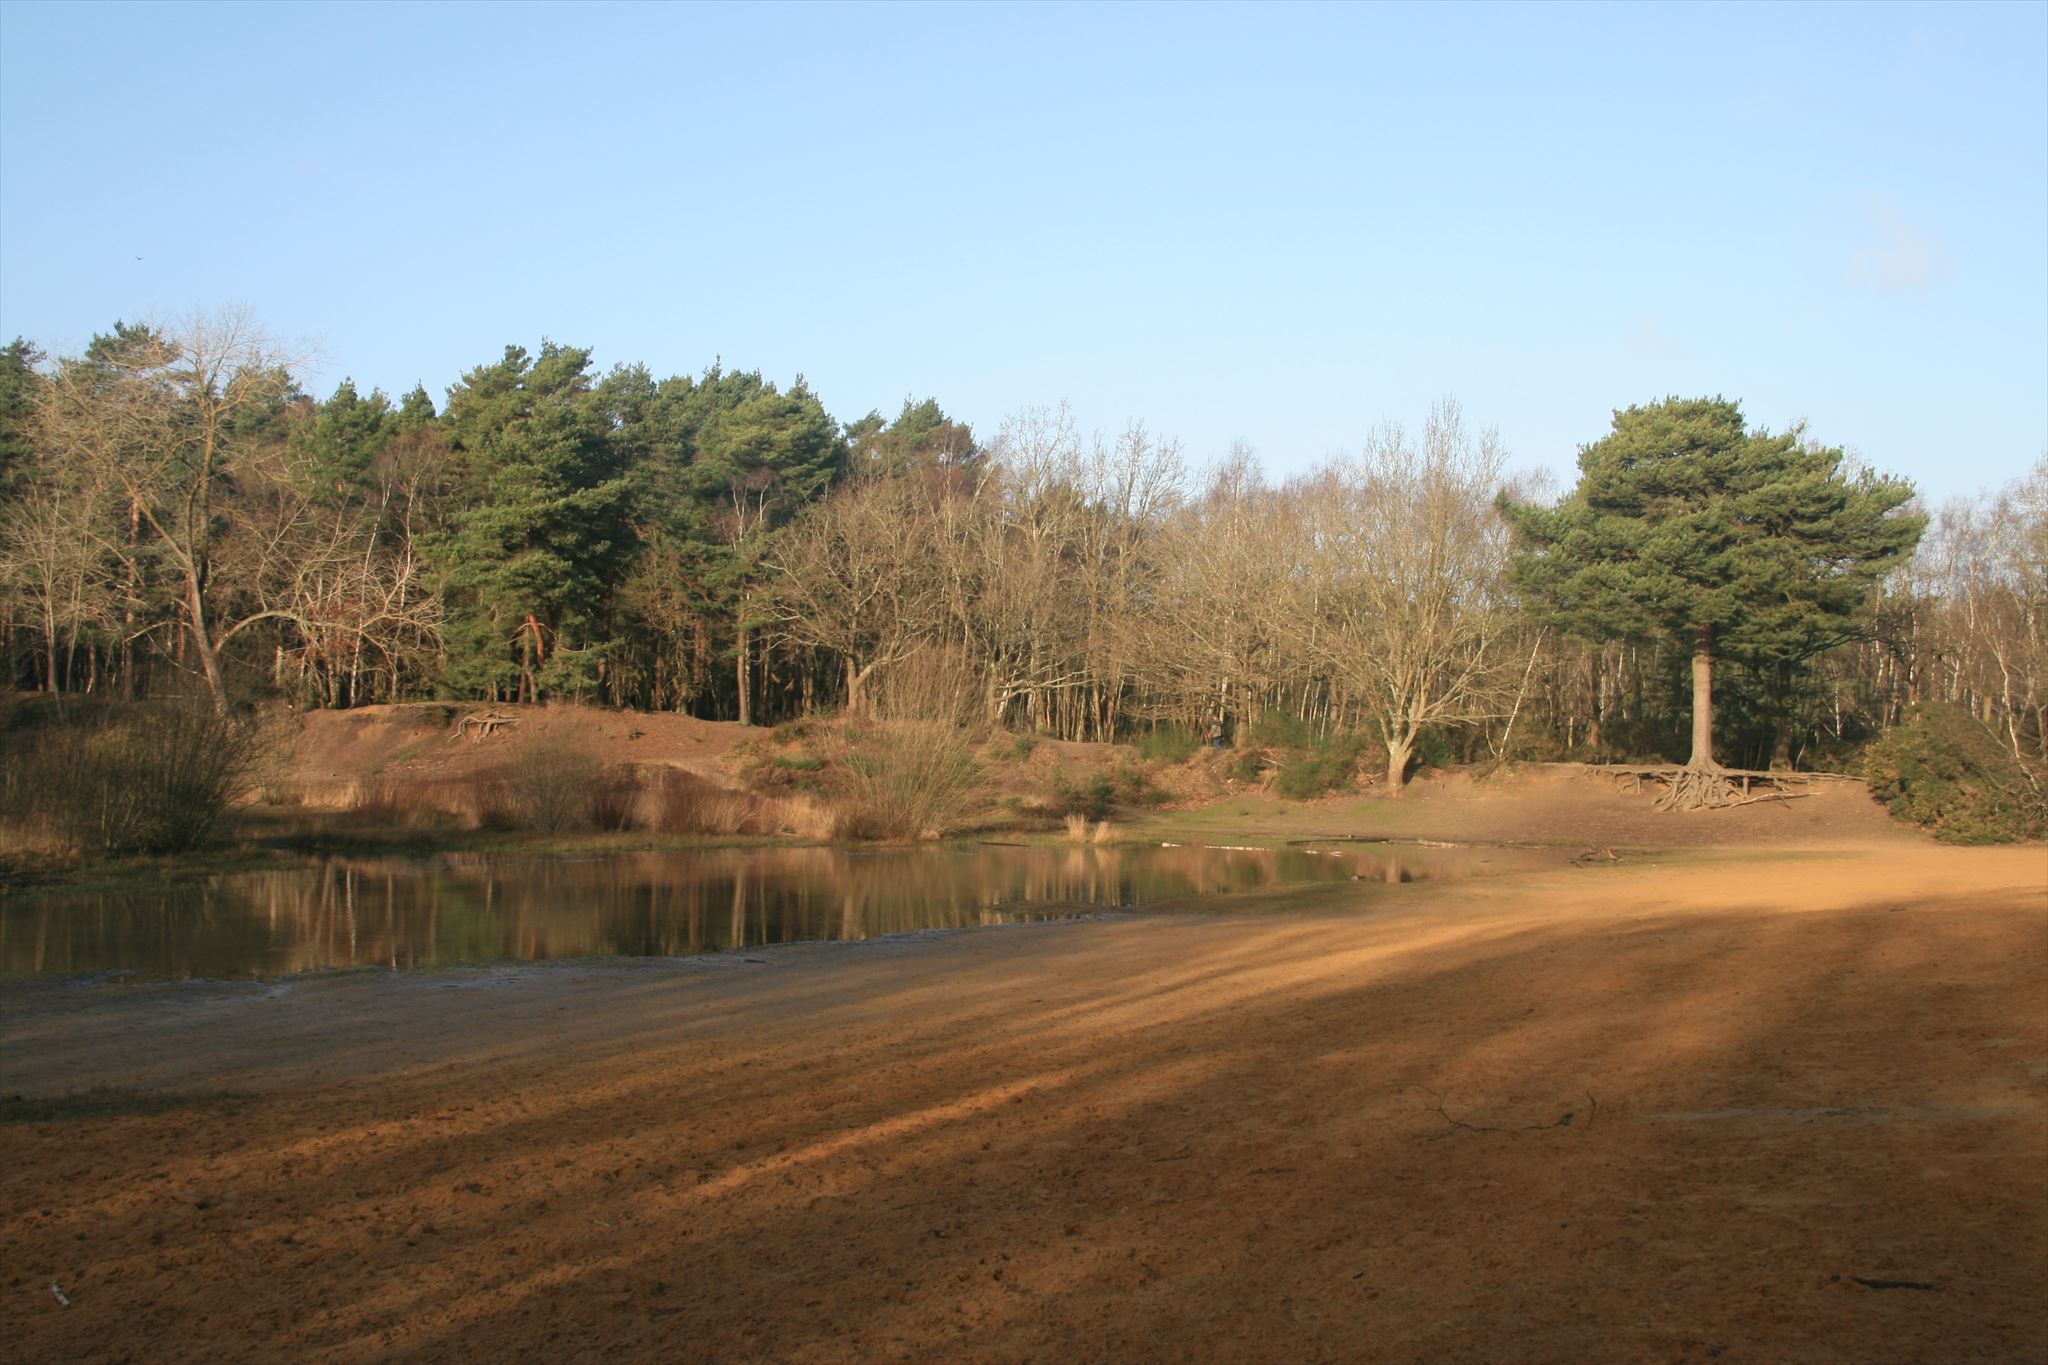 5. The Sandpit on Horsell Common